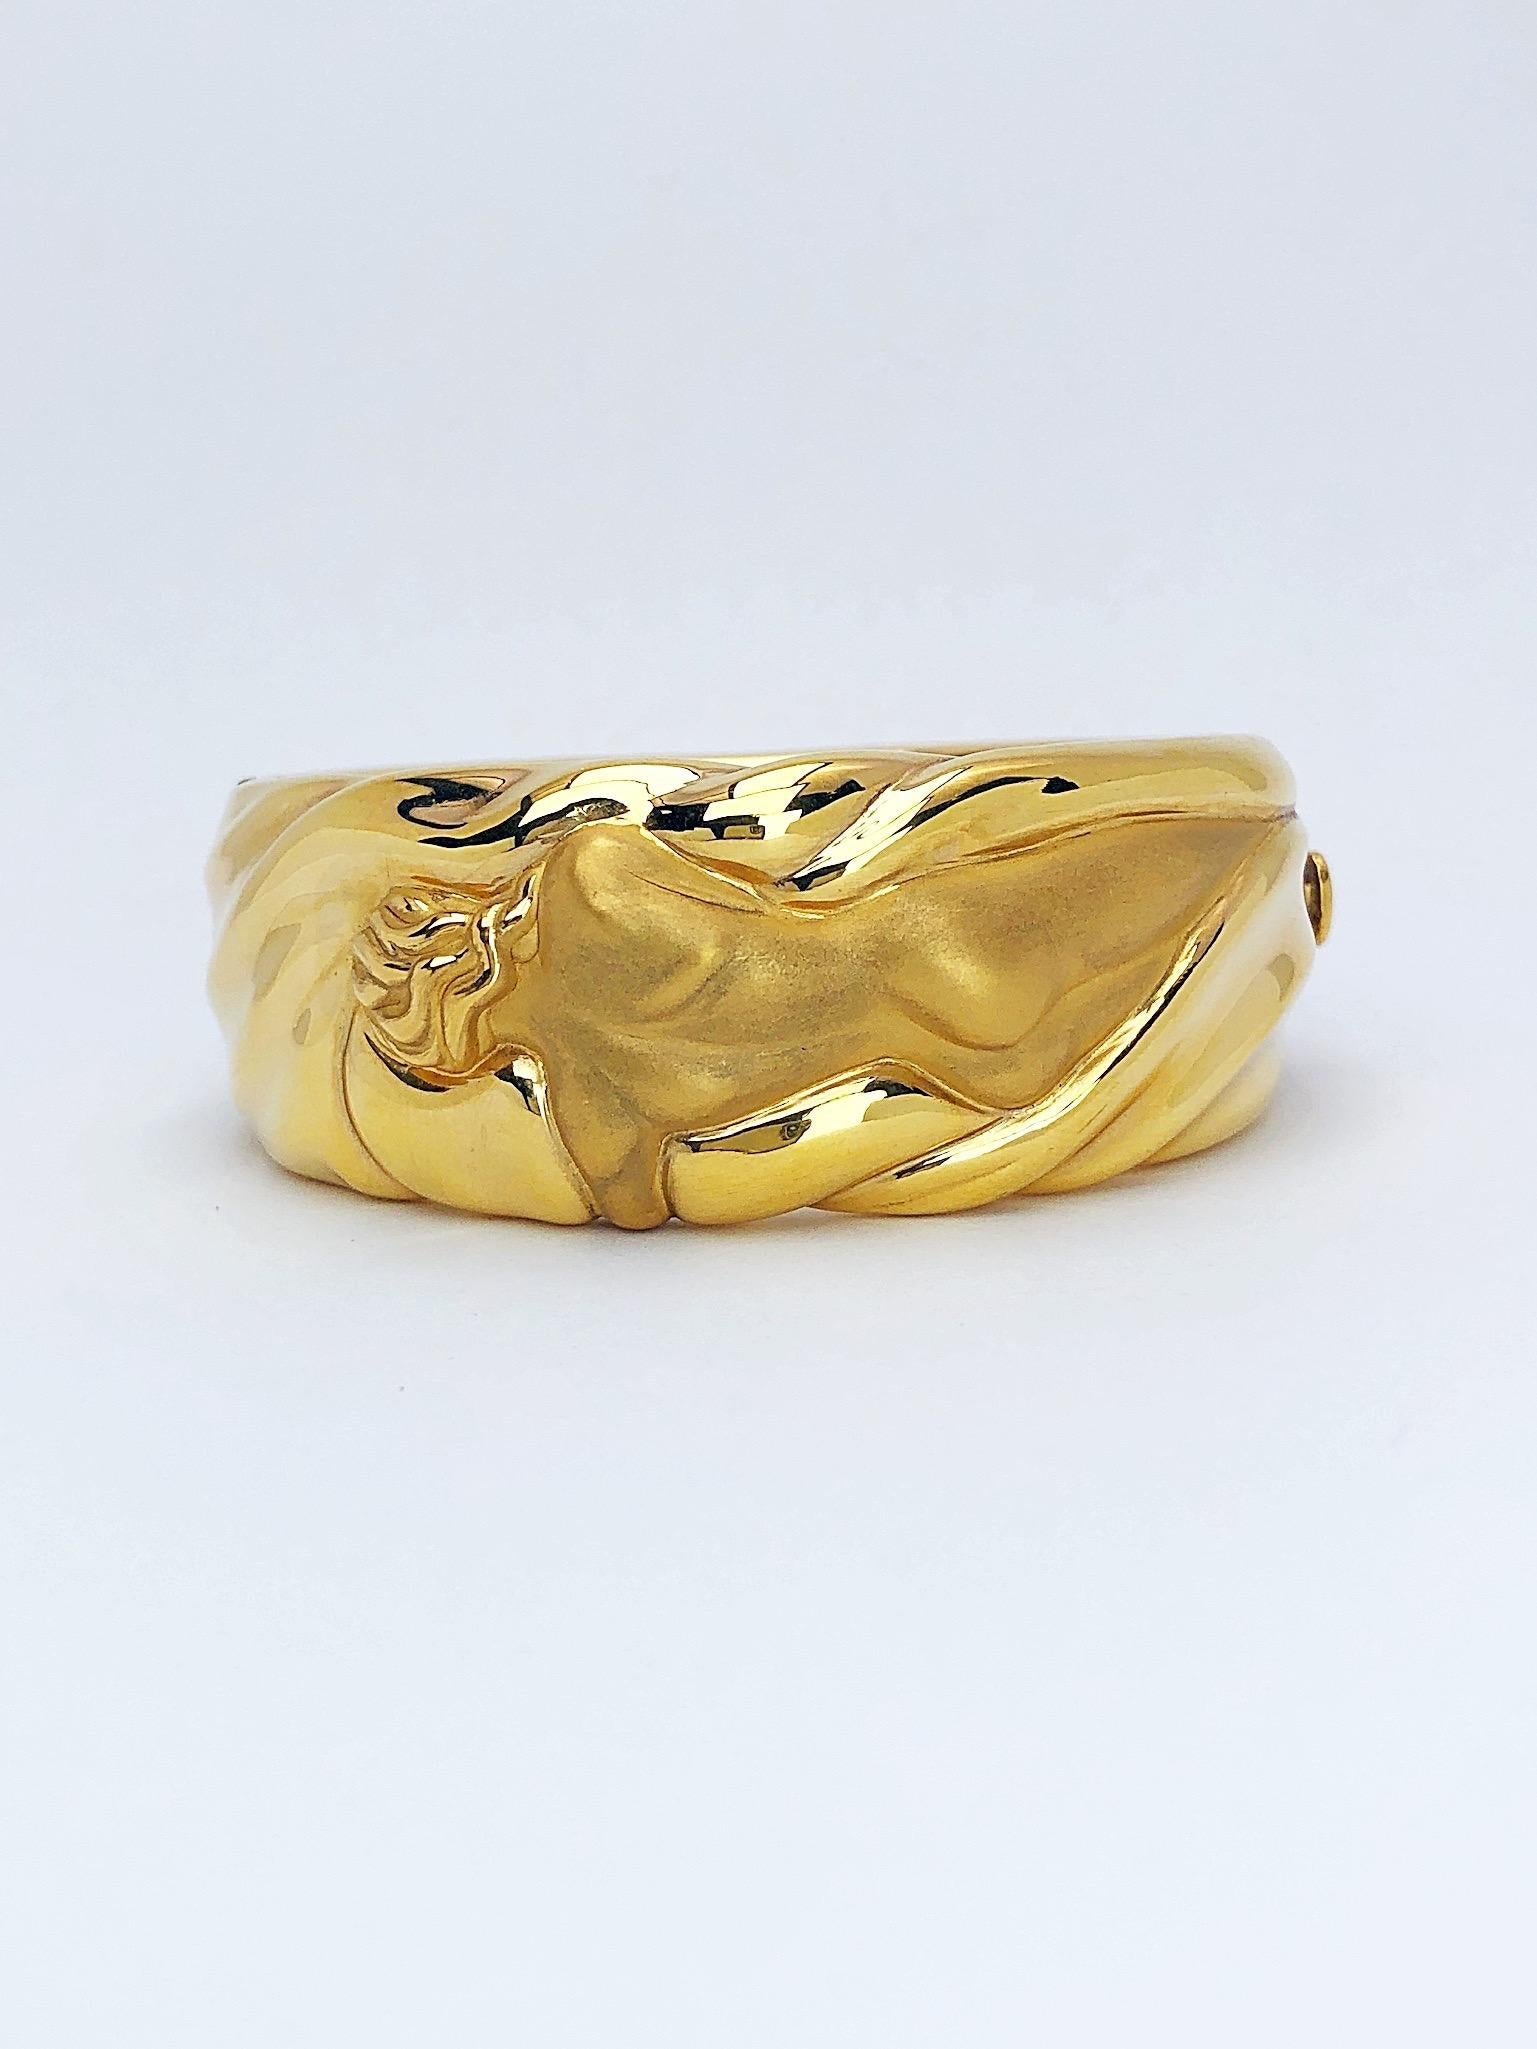 Carrera Y Carrera has built its famous name on figurative designs, an obsession with surface finishes, and a compelling way of seeing beauty in art and nature. This 18 karat yellow gold cuff bracelet is a perfect example of Carrera's iconic designs.